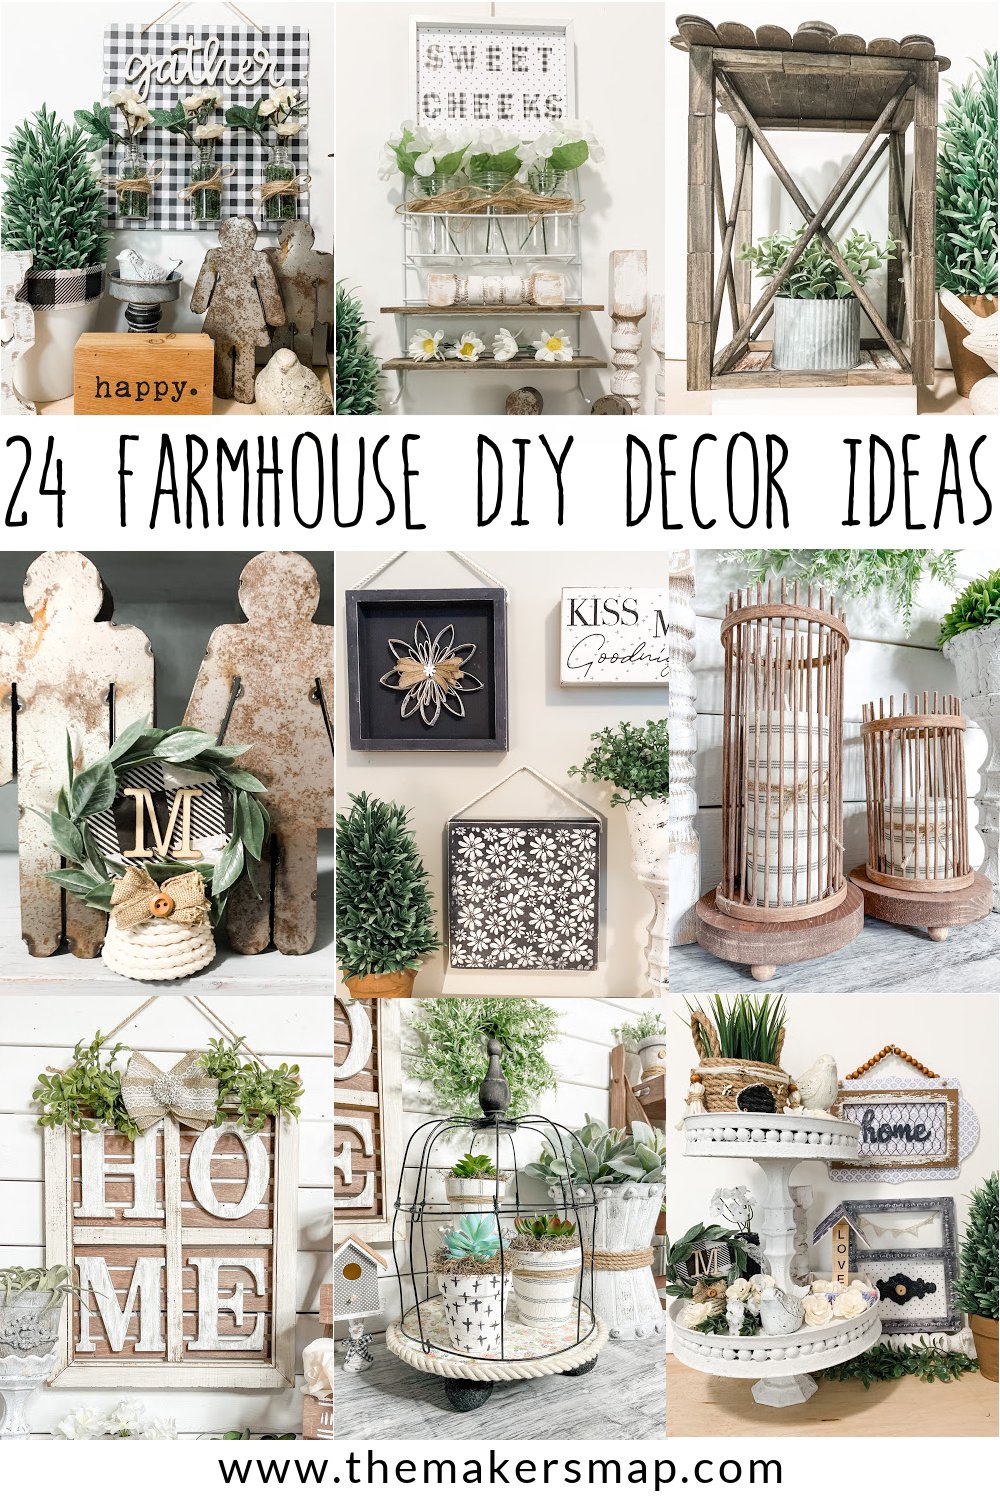 Farmhouse Decor DIY Ideas - The Makers Map with Amber Strong